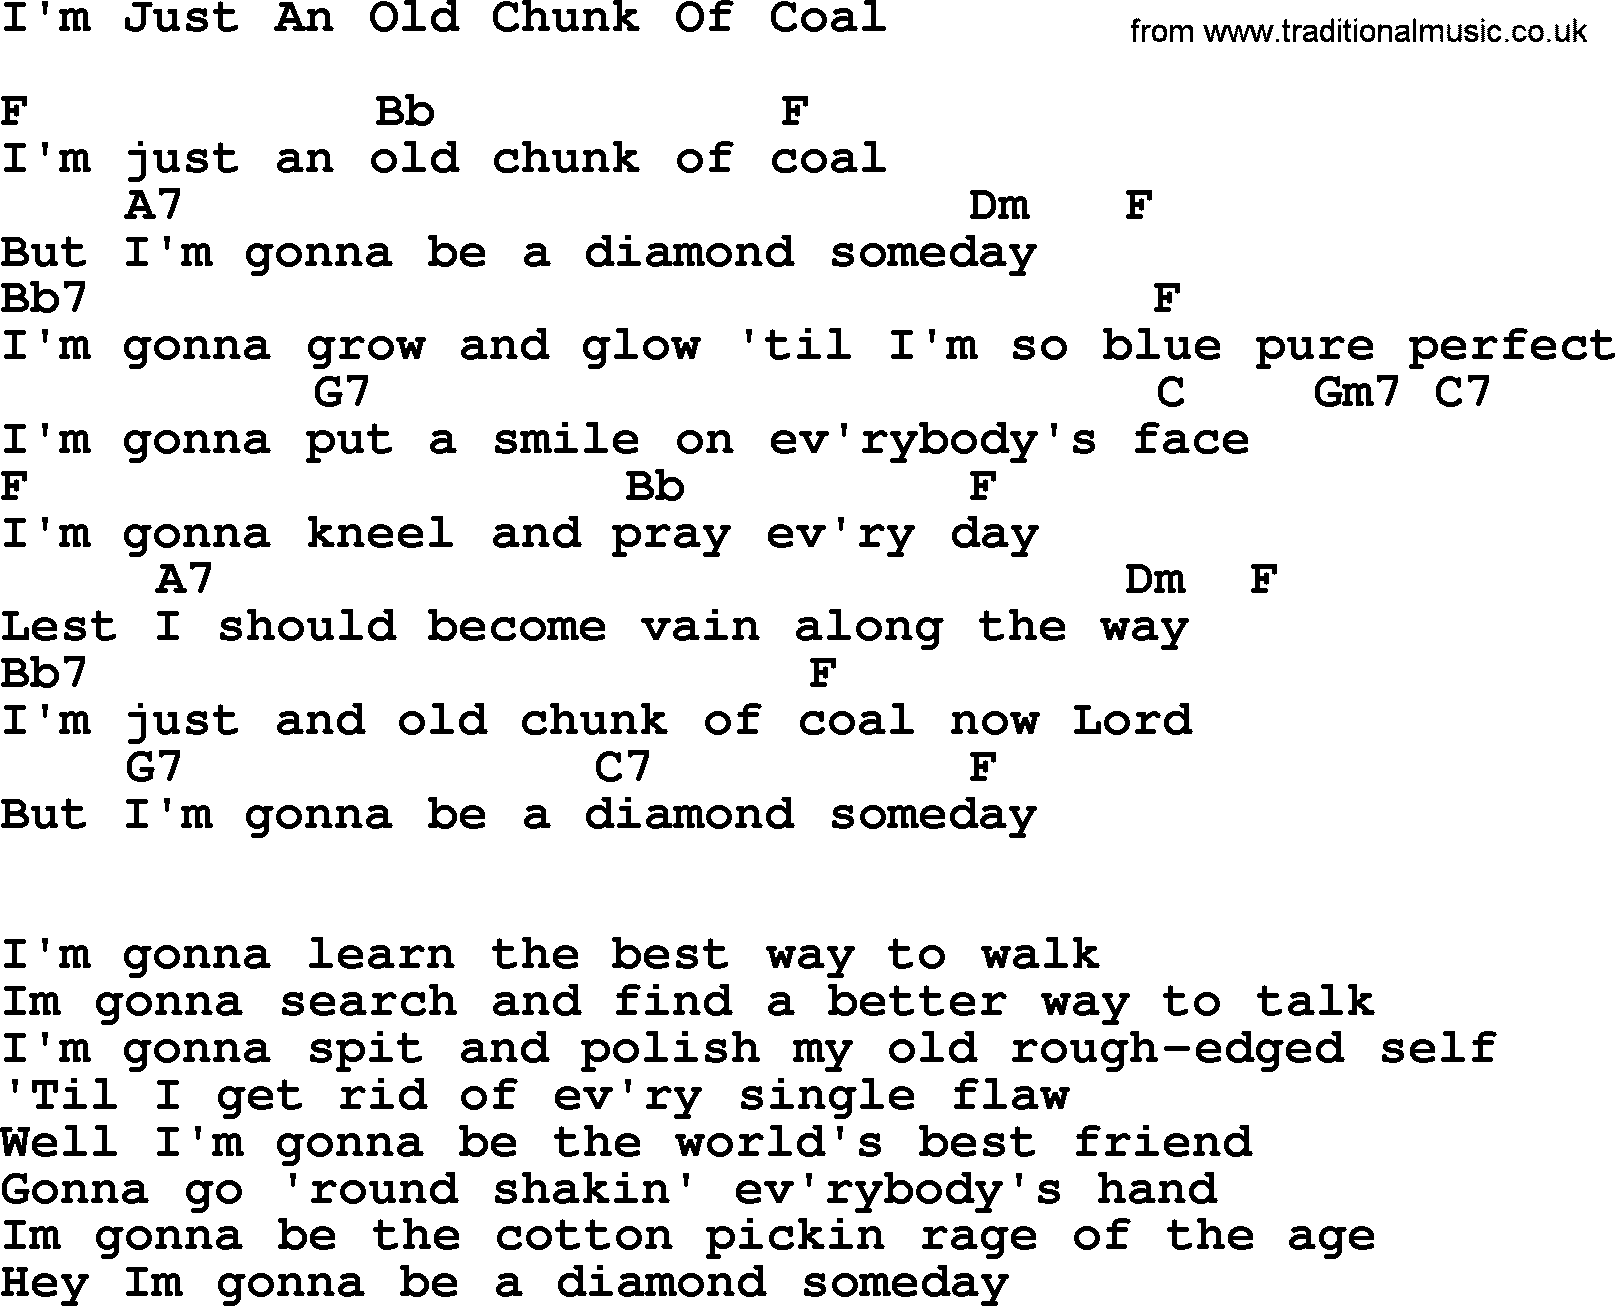 Johnny Cash song I'm Just An Old Chunk Of Coal, lyrics and chords